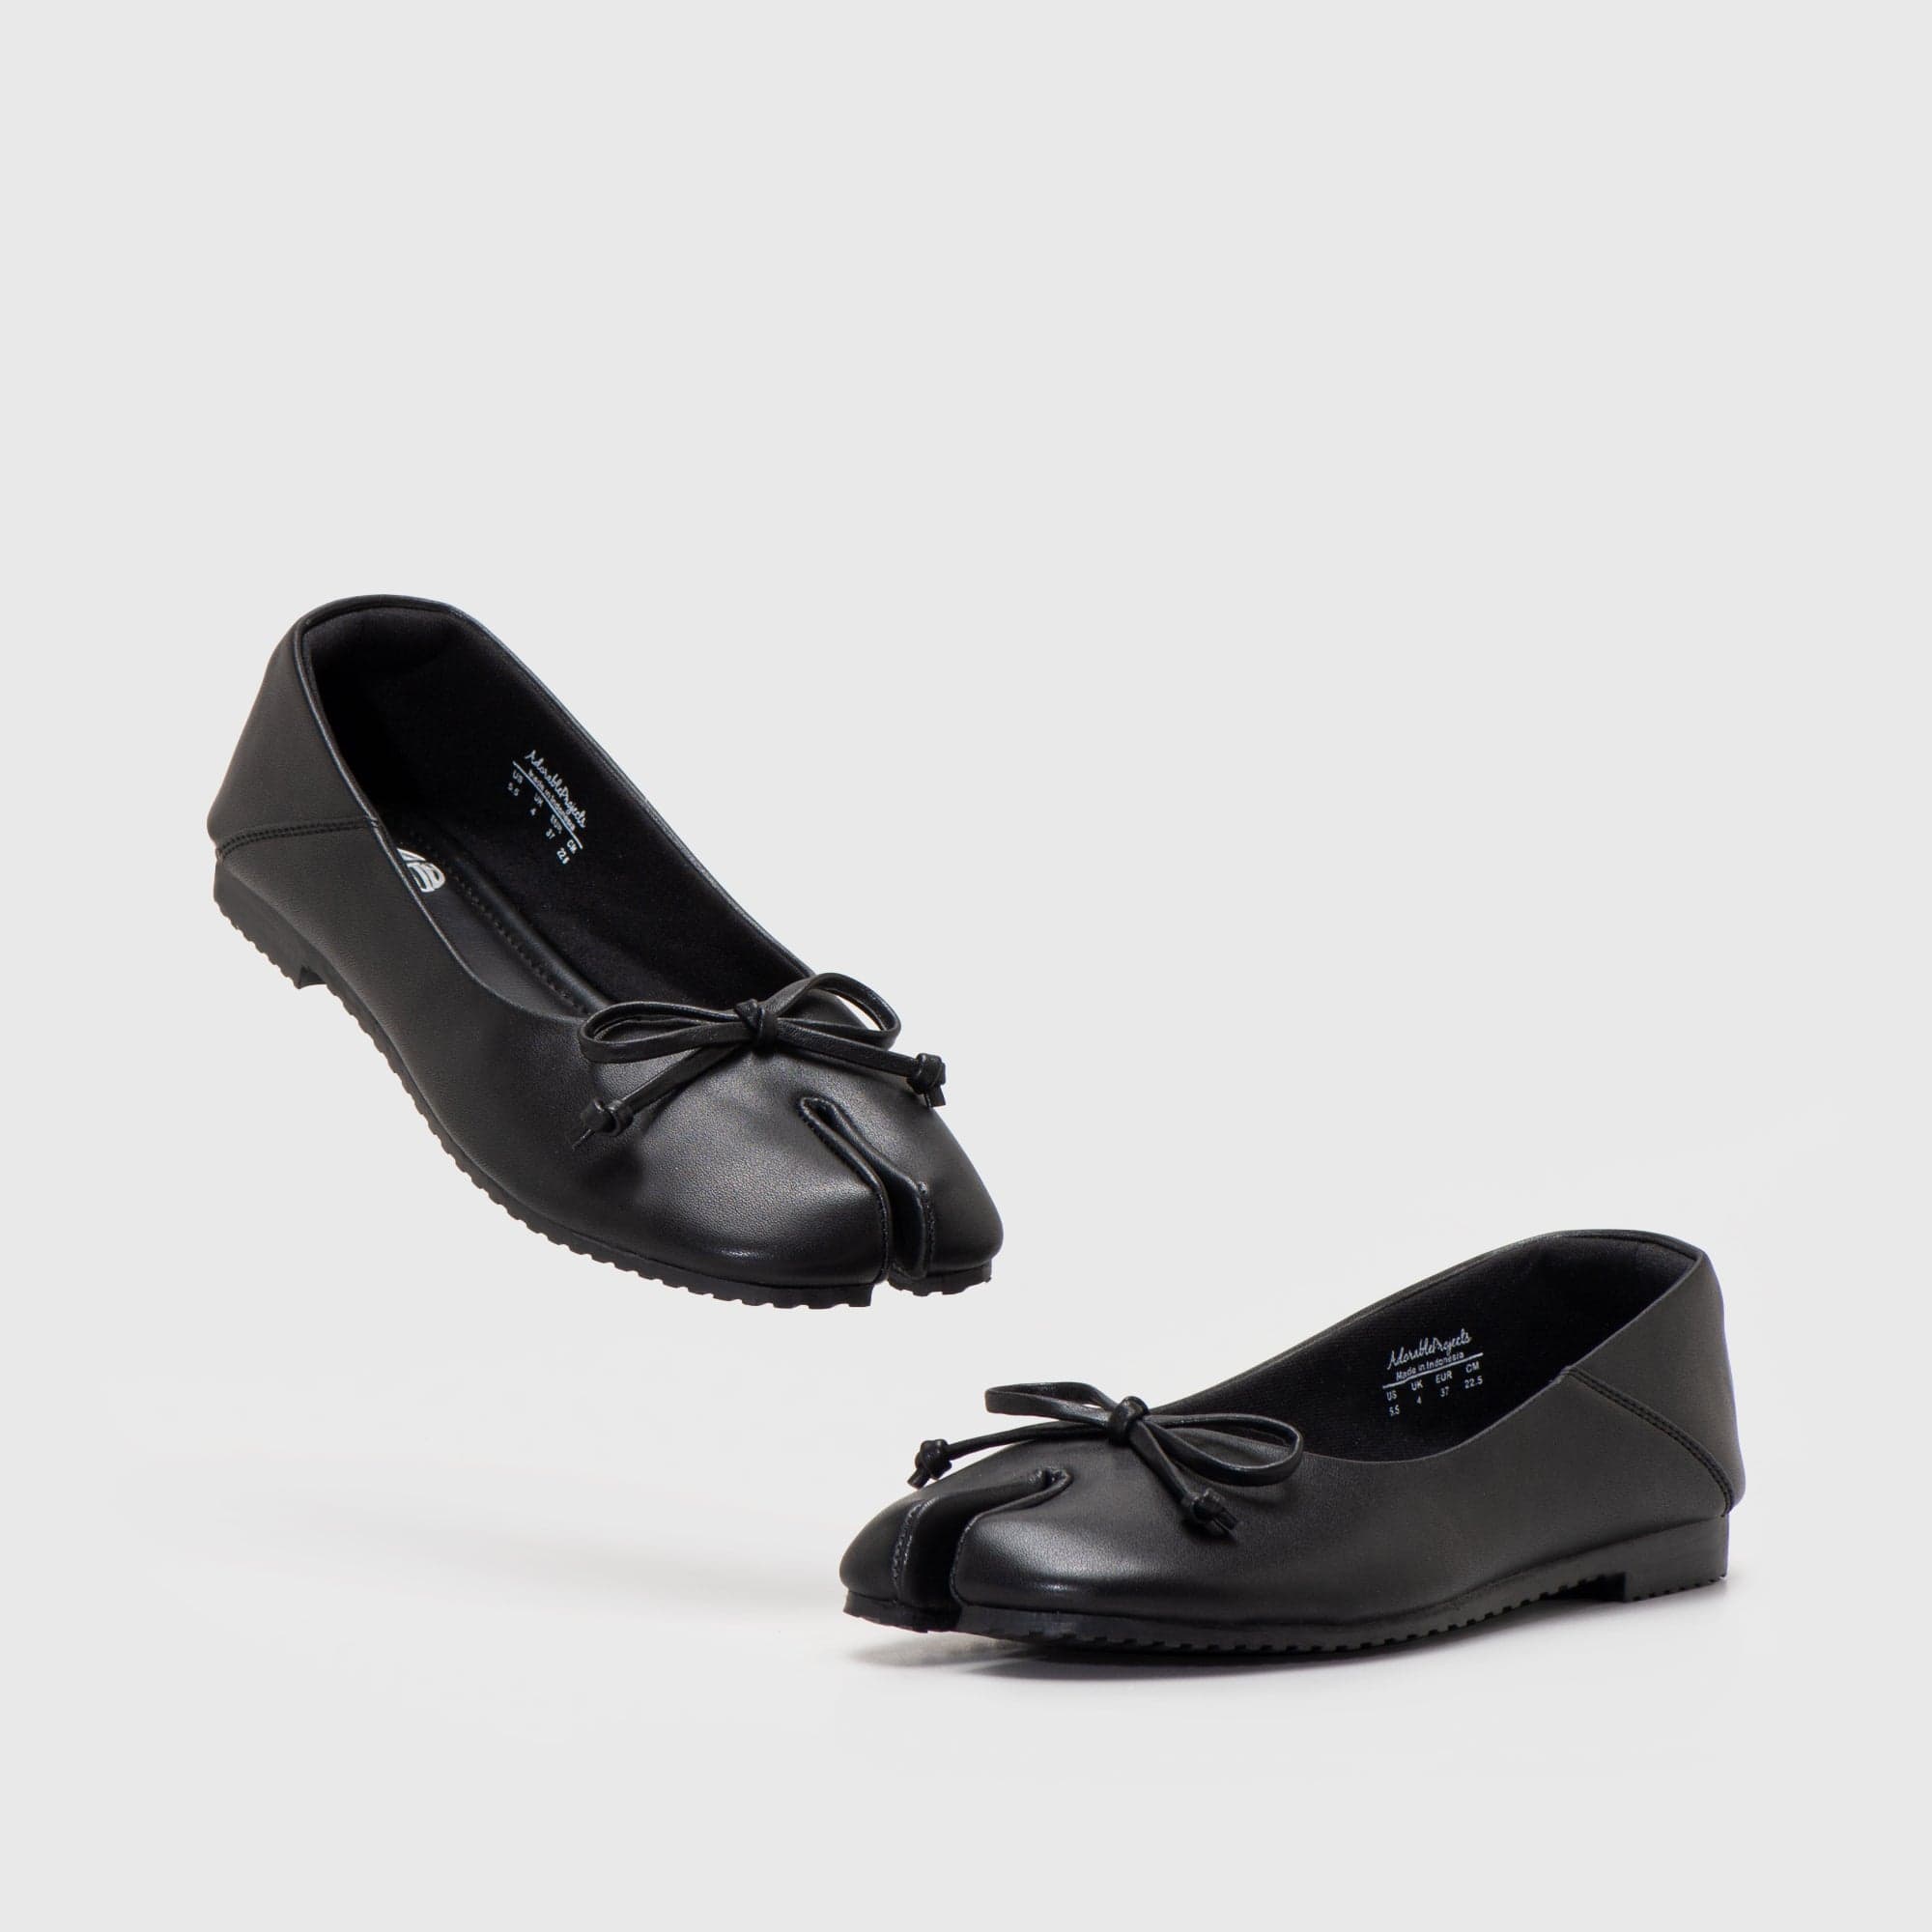 Adorable Projects Official Adorableprojects - Evodia Flat Shoes Black - Sepatu Tabi